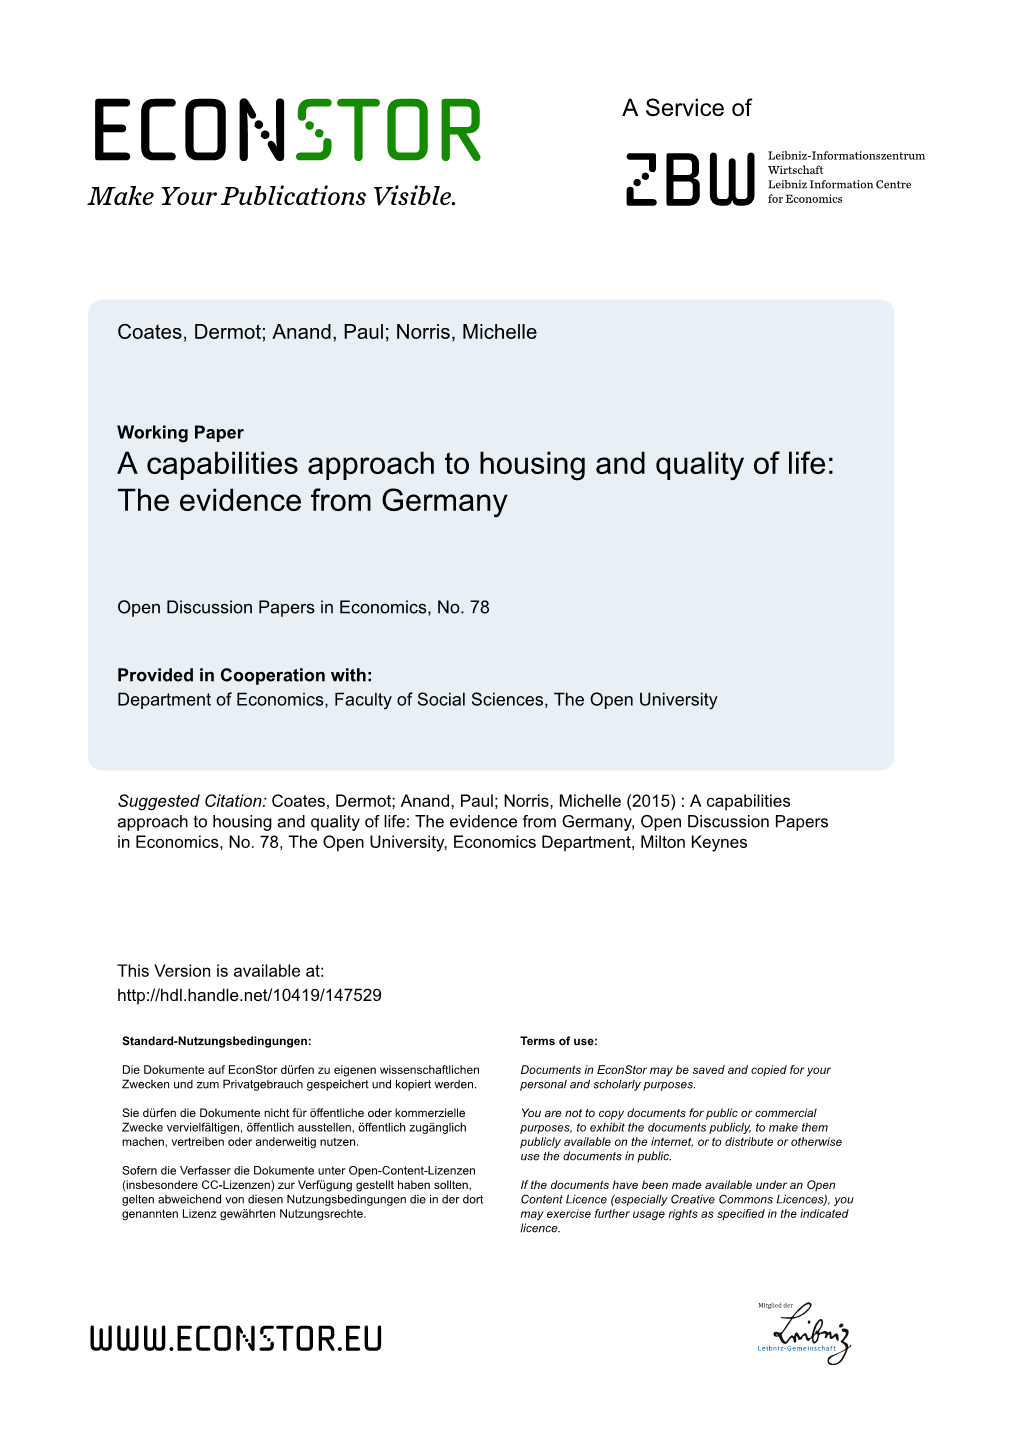 A Capabilities Approach to Housing and Quality of Life: the Evidence from Germany